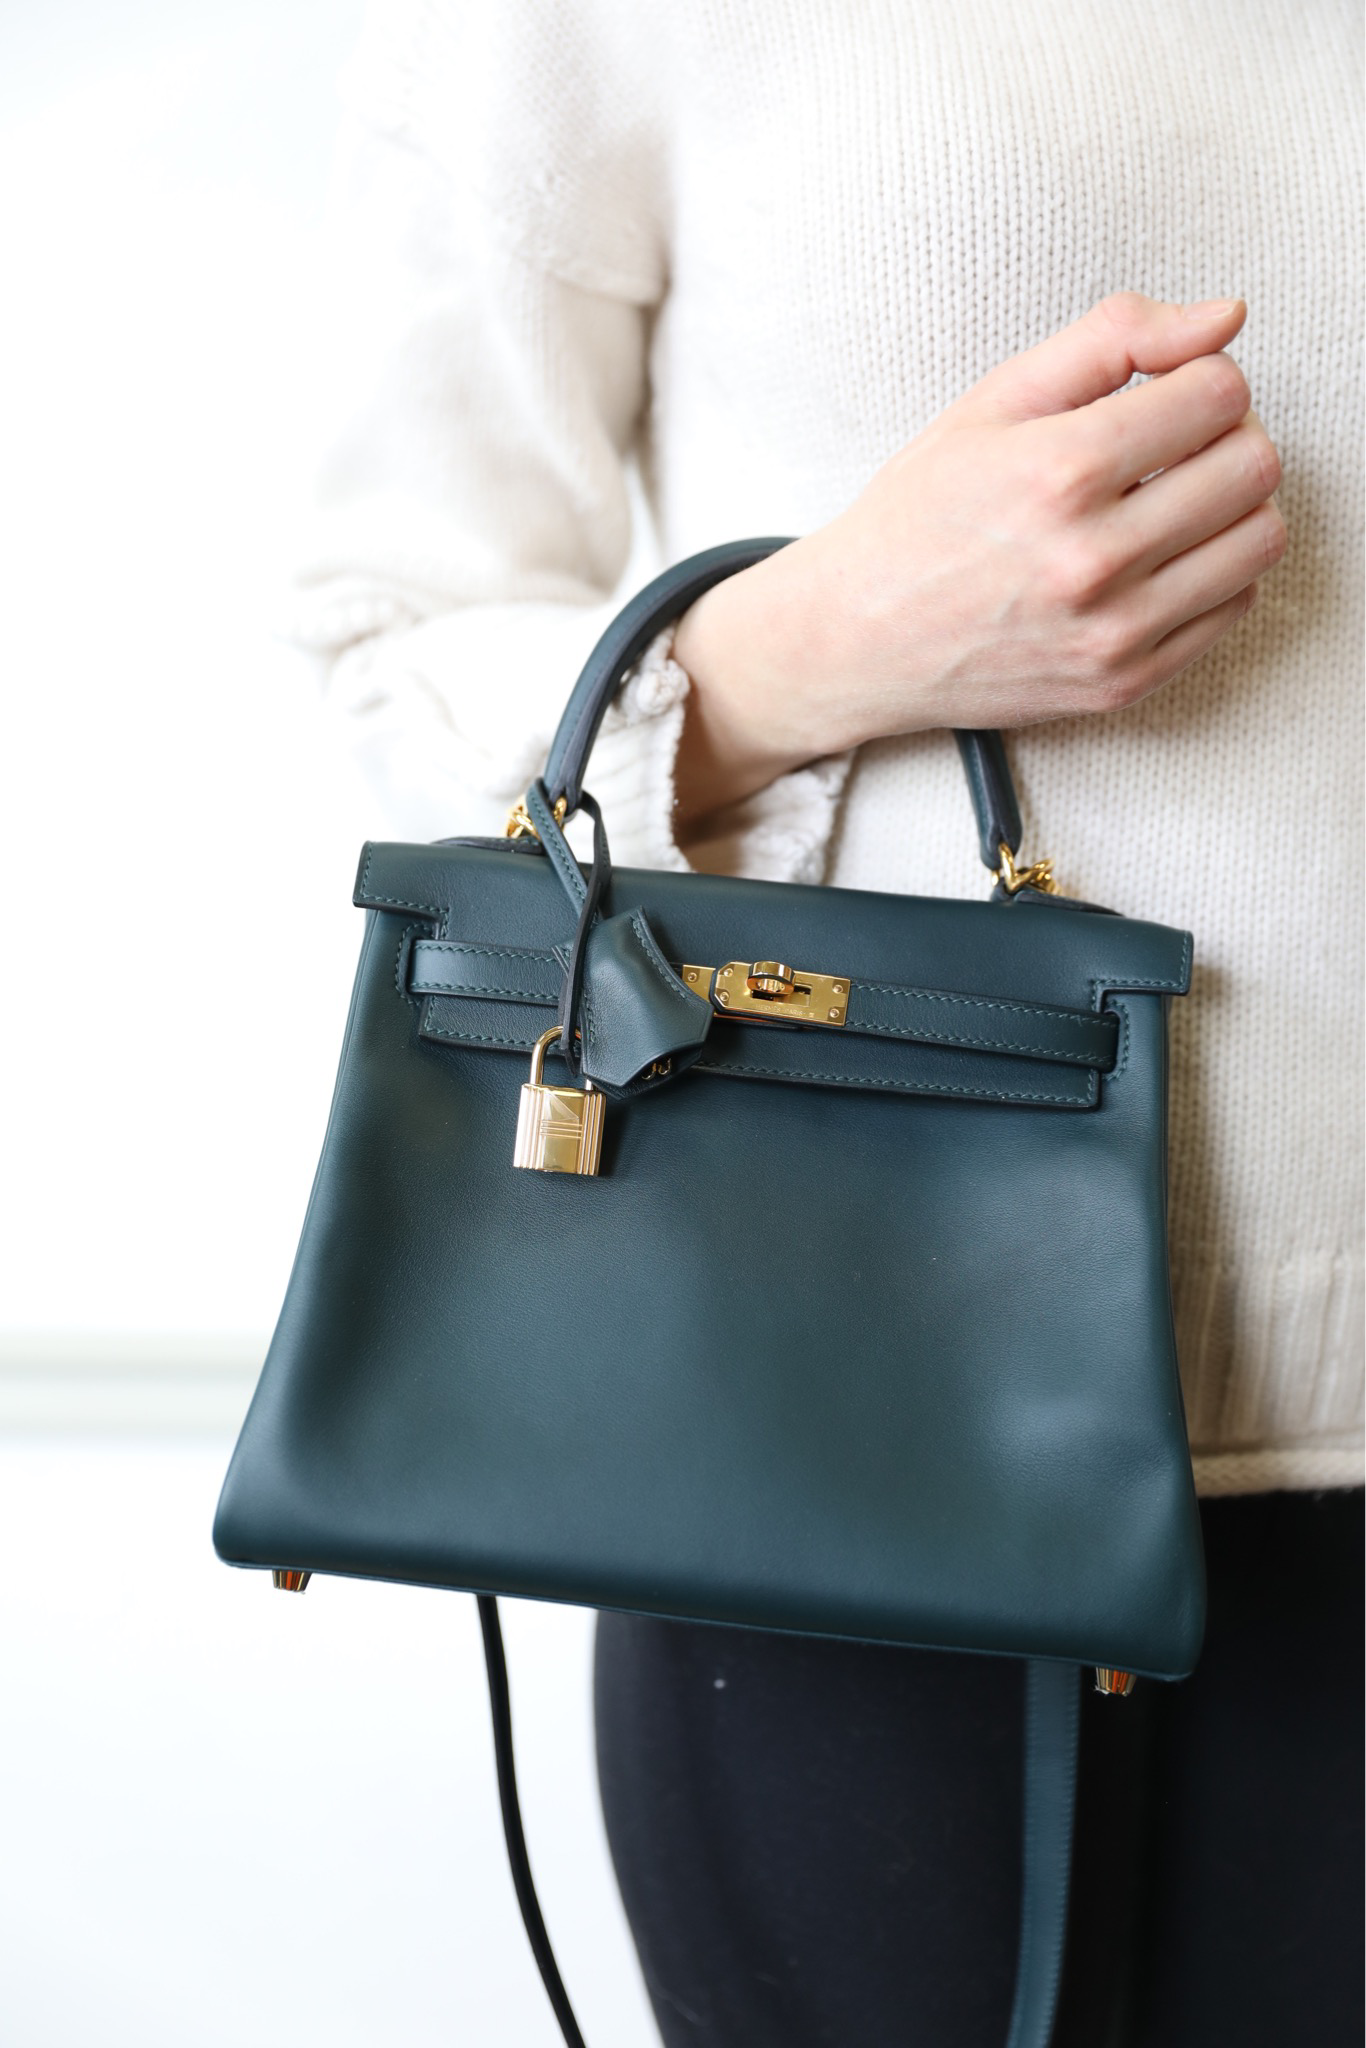 Hermès exotic Kelly 25 Cypress vert. Available immediately for persona